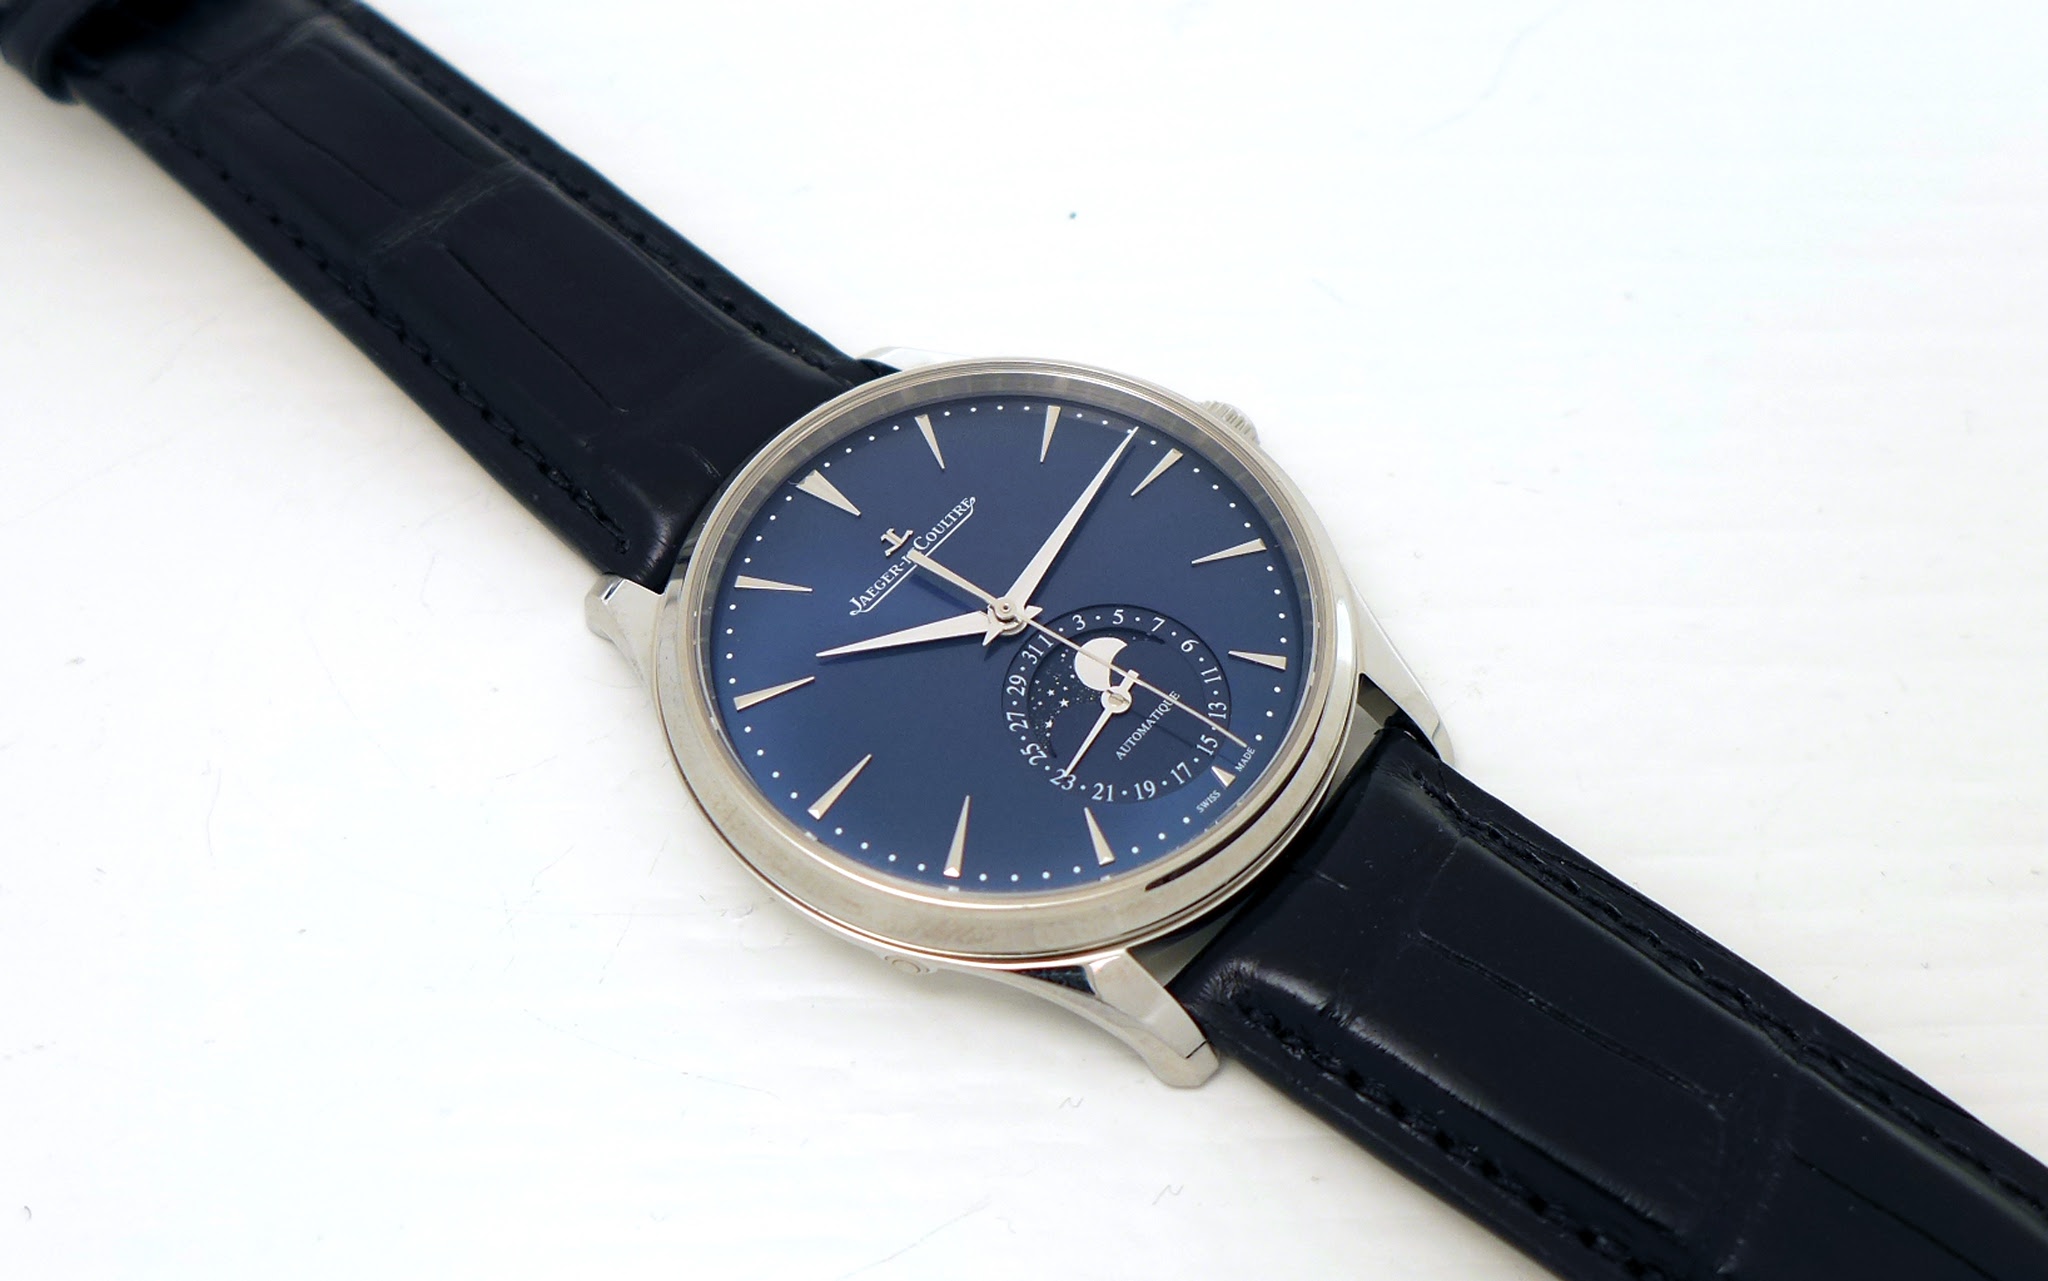 Jaeger LeCoultre Master Ultra Thin Moon Review